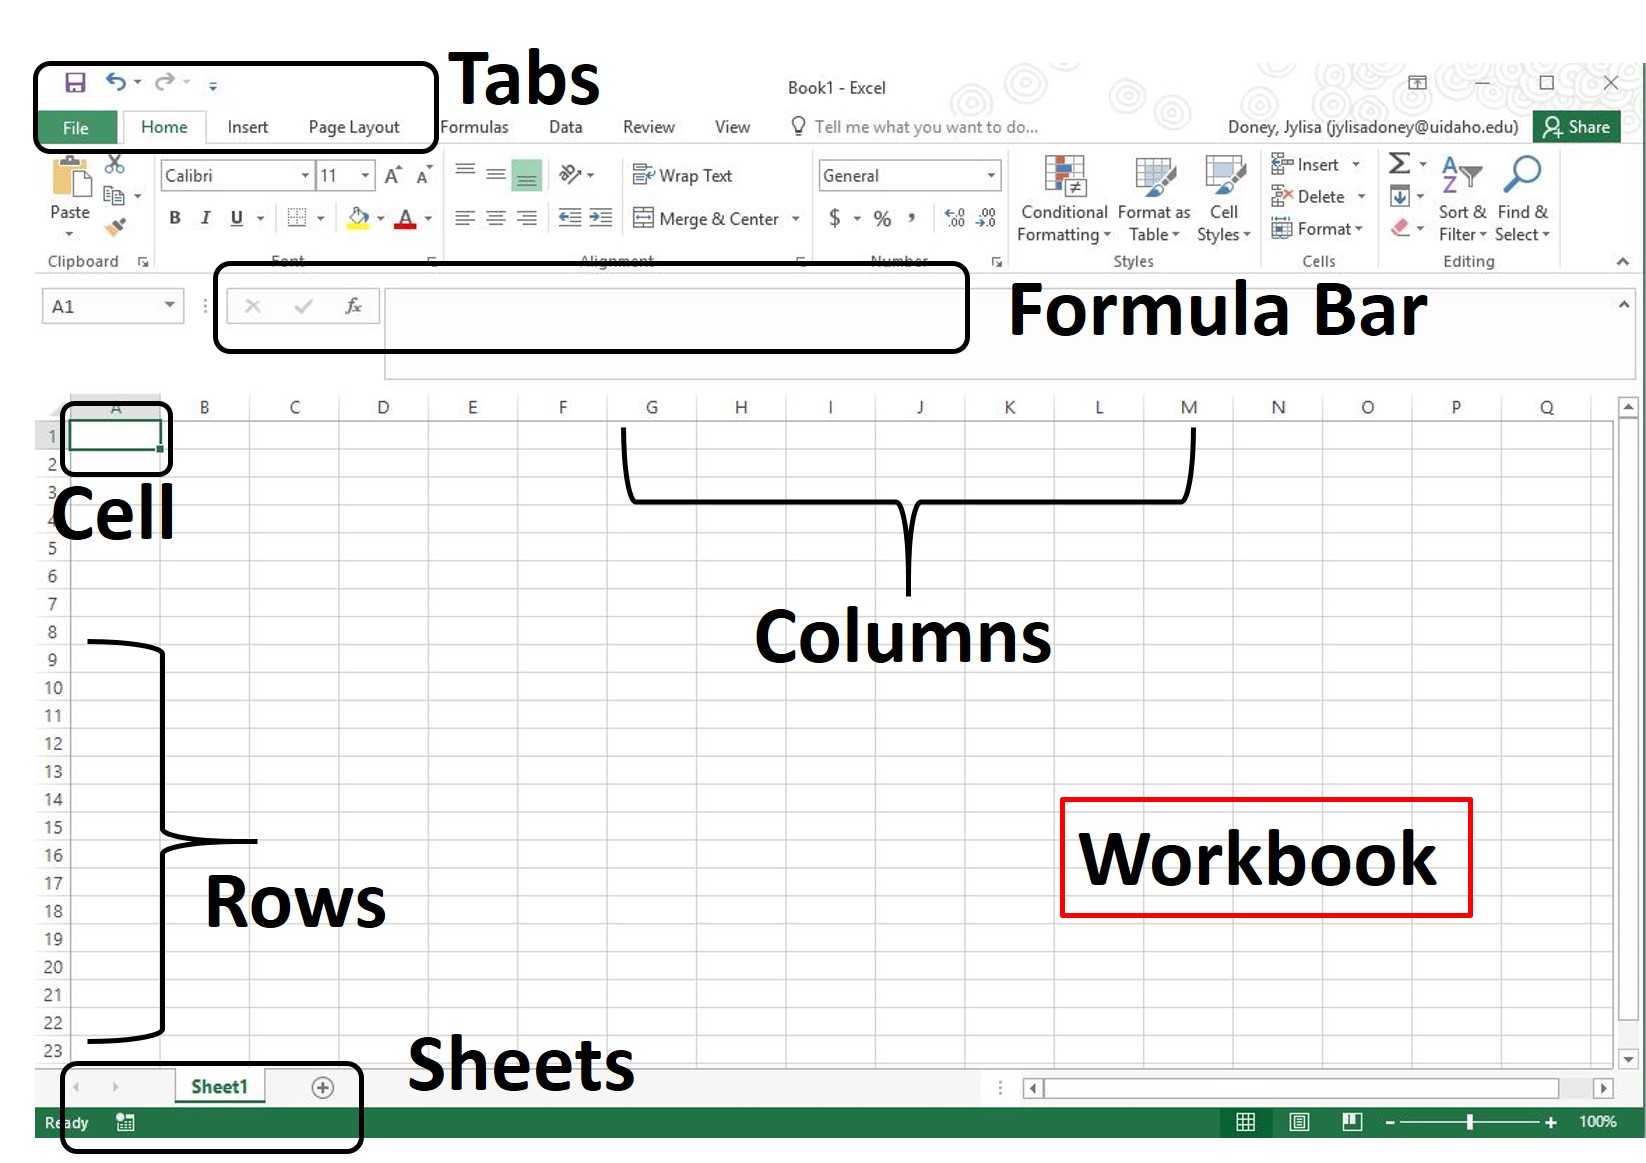 Excel workbook with terminology labels